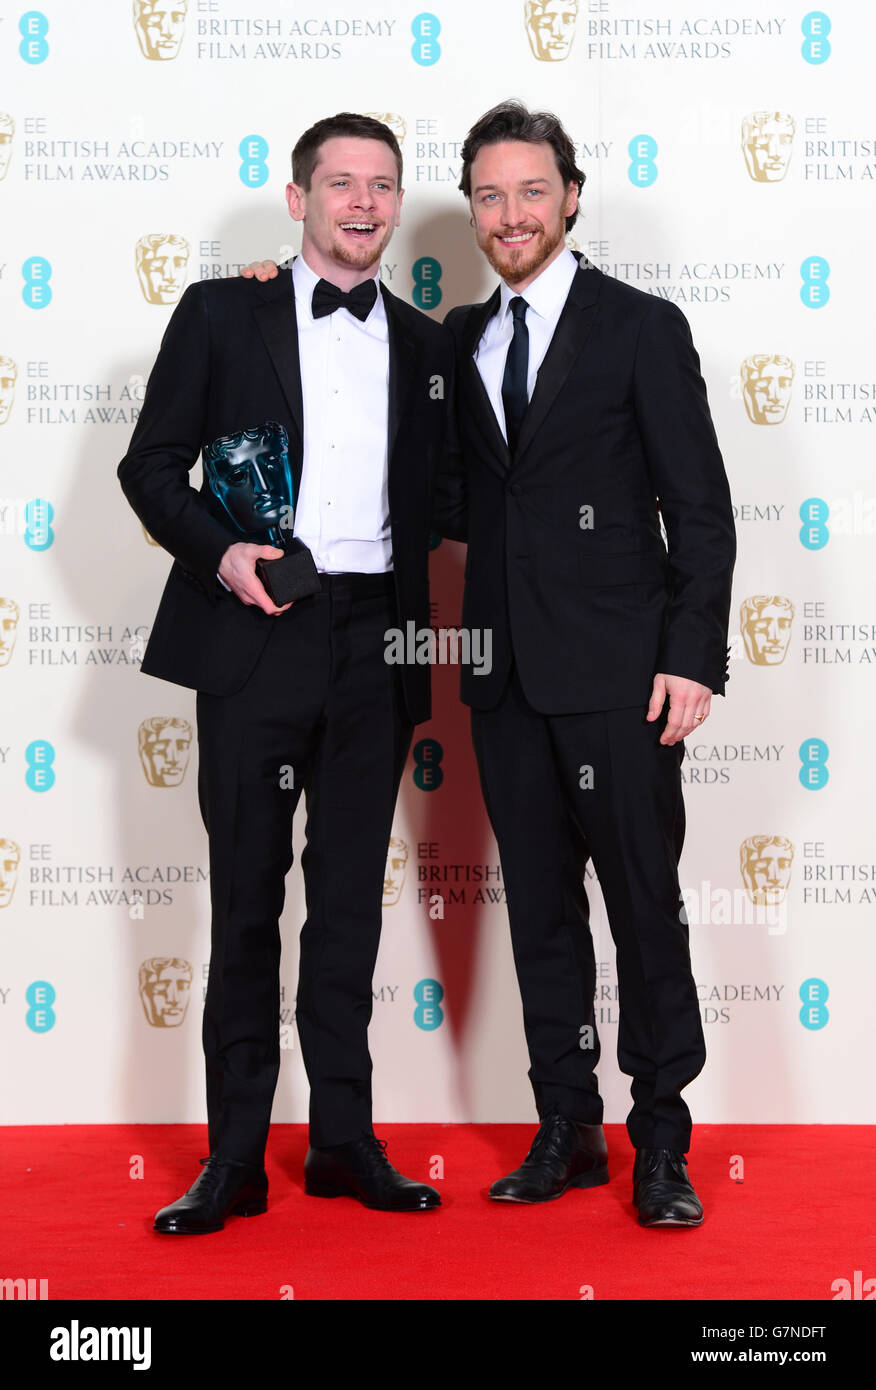 Jack O'Connell with the EE Rising Star Award alongside James McAvoy (right), at the EE British Academy Film Awards at the Royal Opera House, Bow Street in London. PRESS ASSOCIATION Photo. Picture date: Sunday February 8, 2015. See PA story SHOWBIZ Bafta. Photo credit should read: Dominic Lipinski/PA Wire Stock Photo